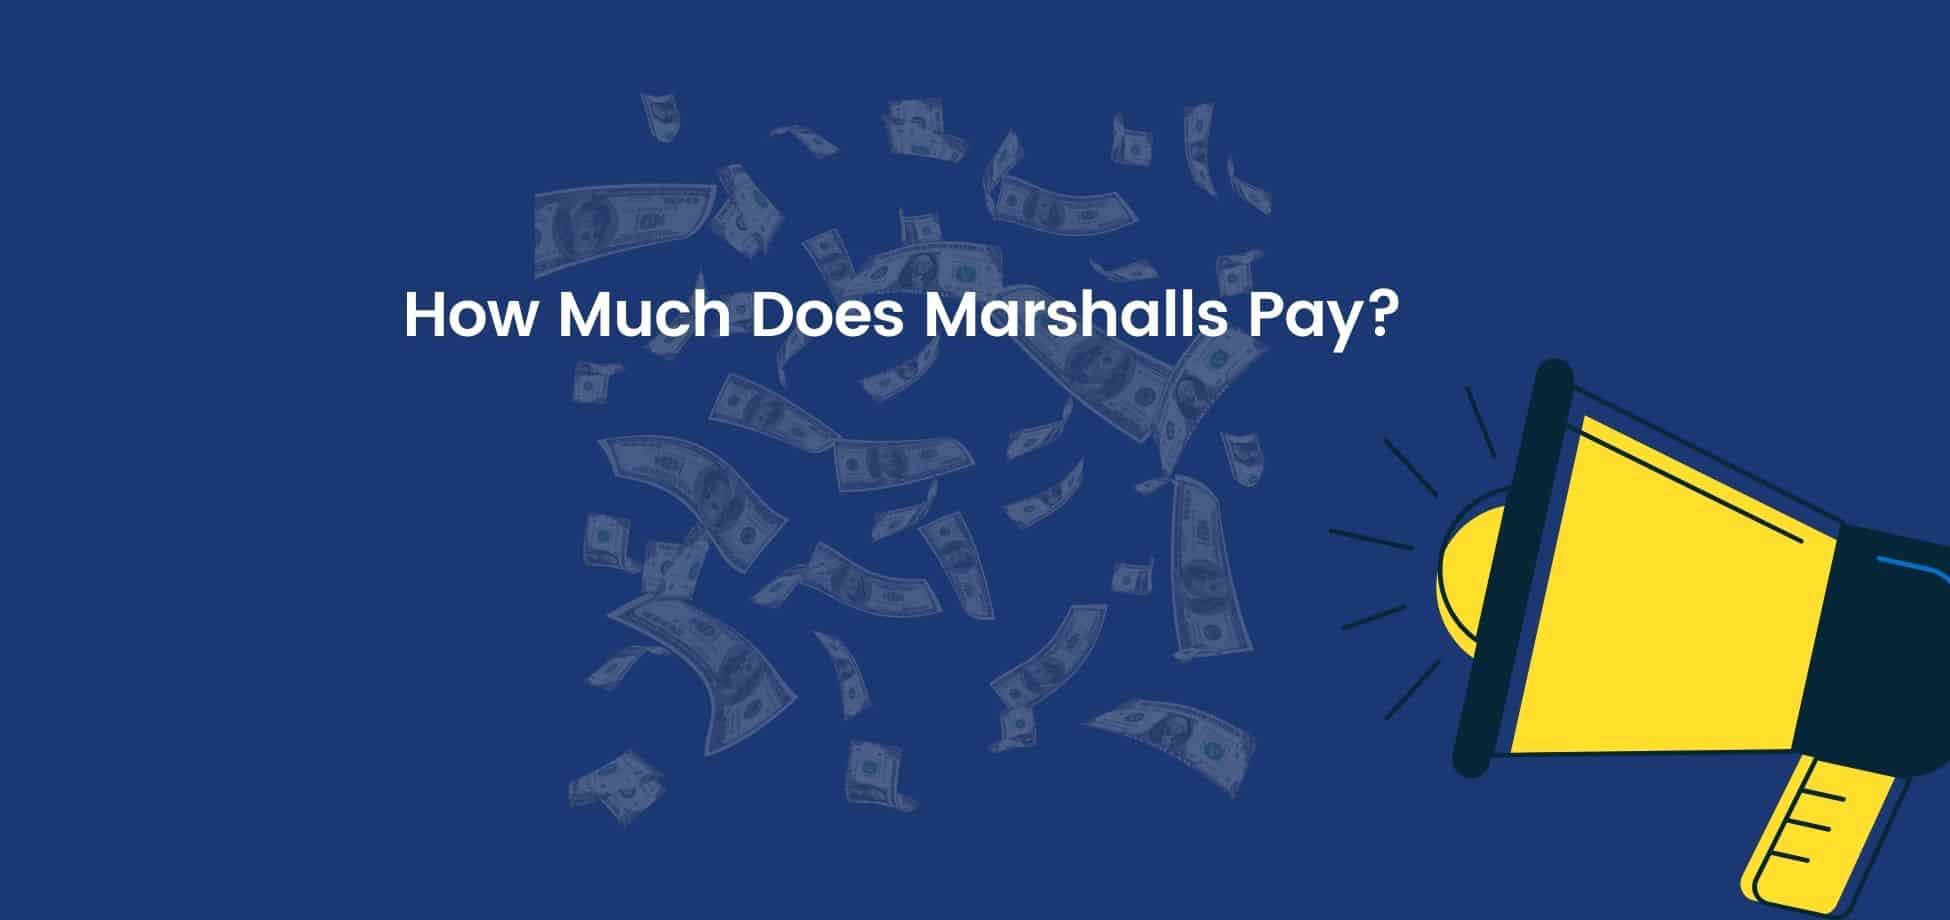 See the answer to, "How much does Marshalls pay?" so you can get an idea about whether a job here meets your expectations.